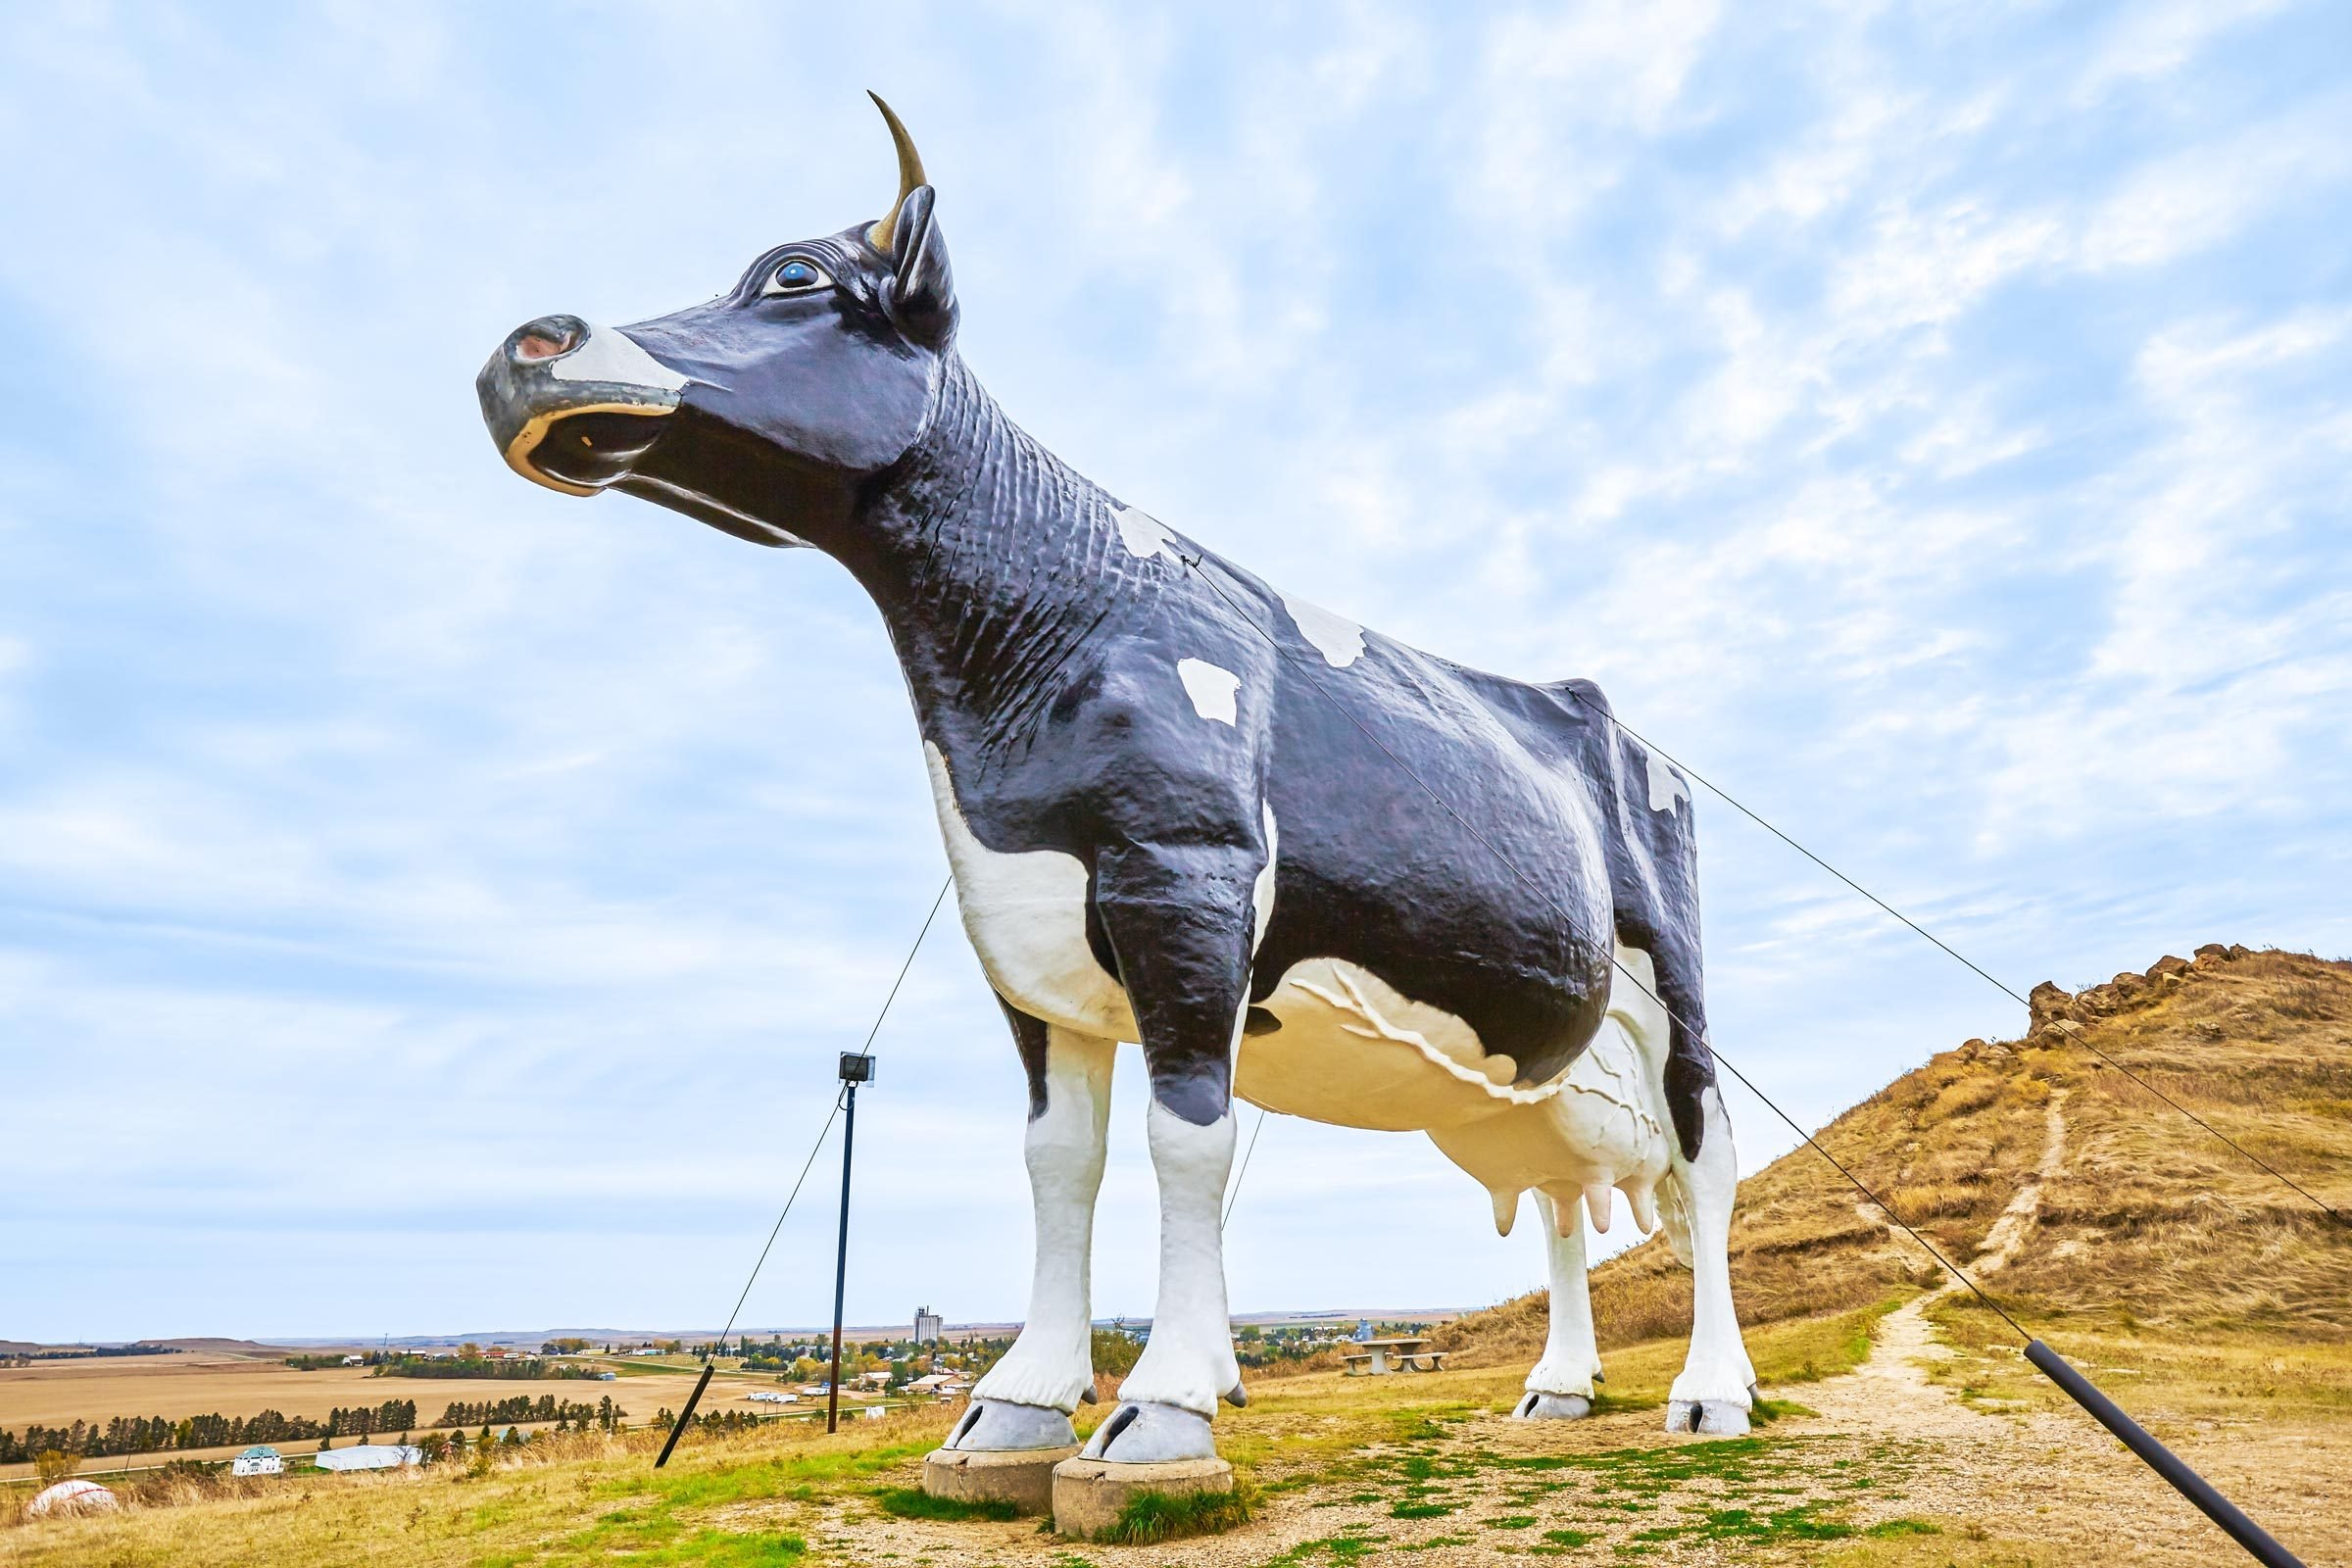 Salem Sue is the World's Largest Holstein Cow at 38 feet high and 50 feet long, North Dakota, USA